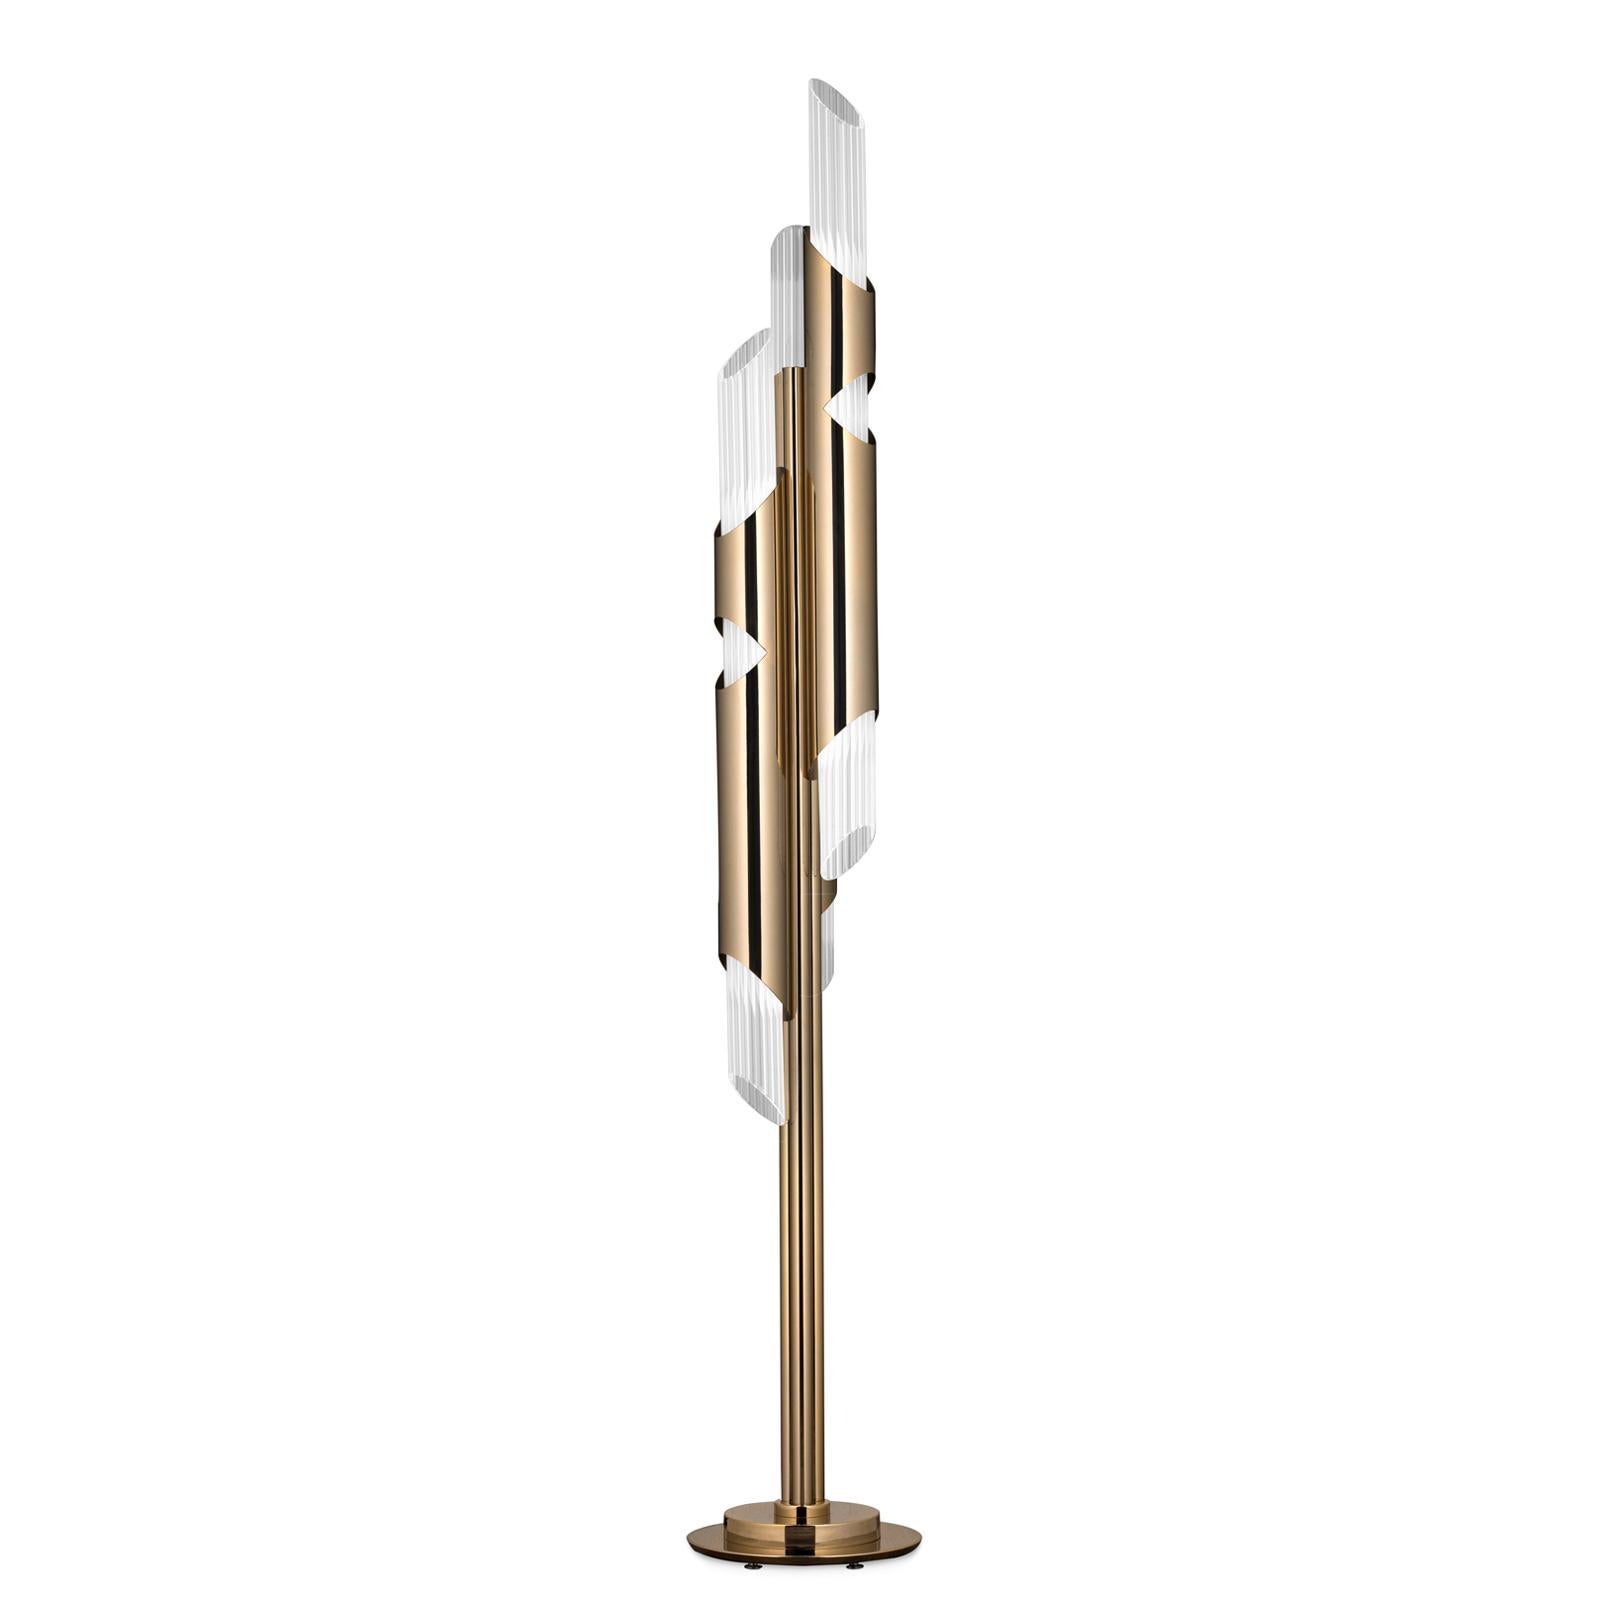 Floor lamp Arizona with structure in gold plated solid brass
and with crystal glass tubes. With 6 led bulbs, lamp holder type
G9, max 2Watt, 220-240 Voltage. Bulbs not included.
 